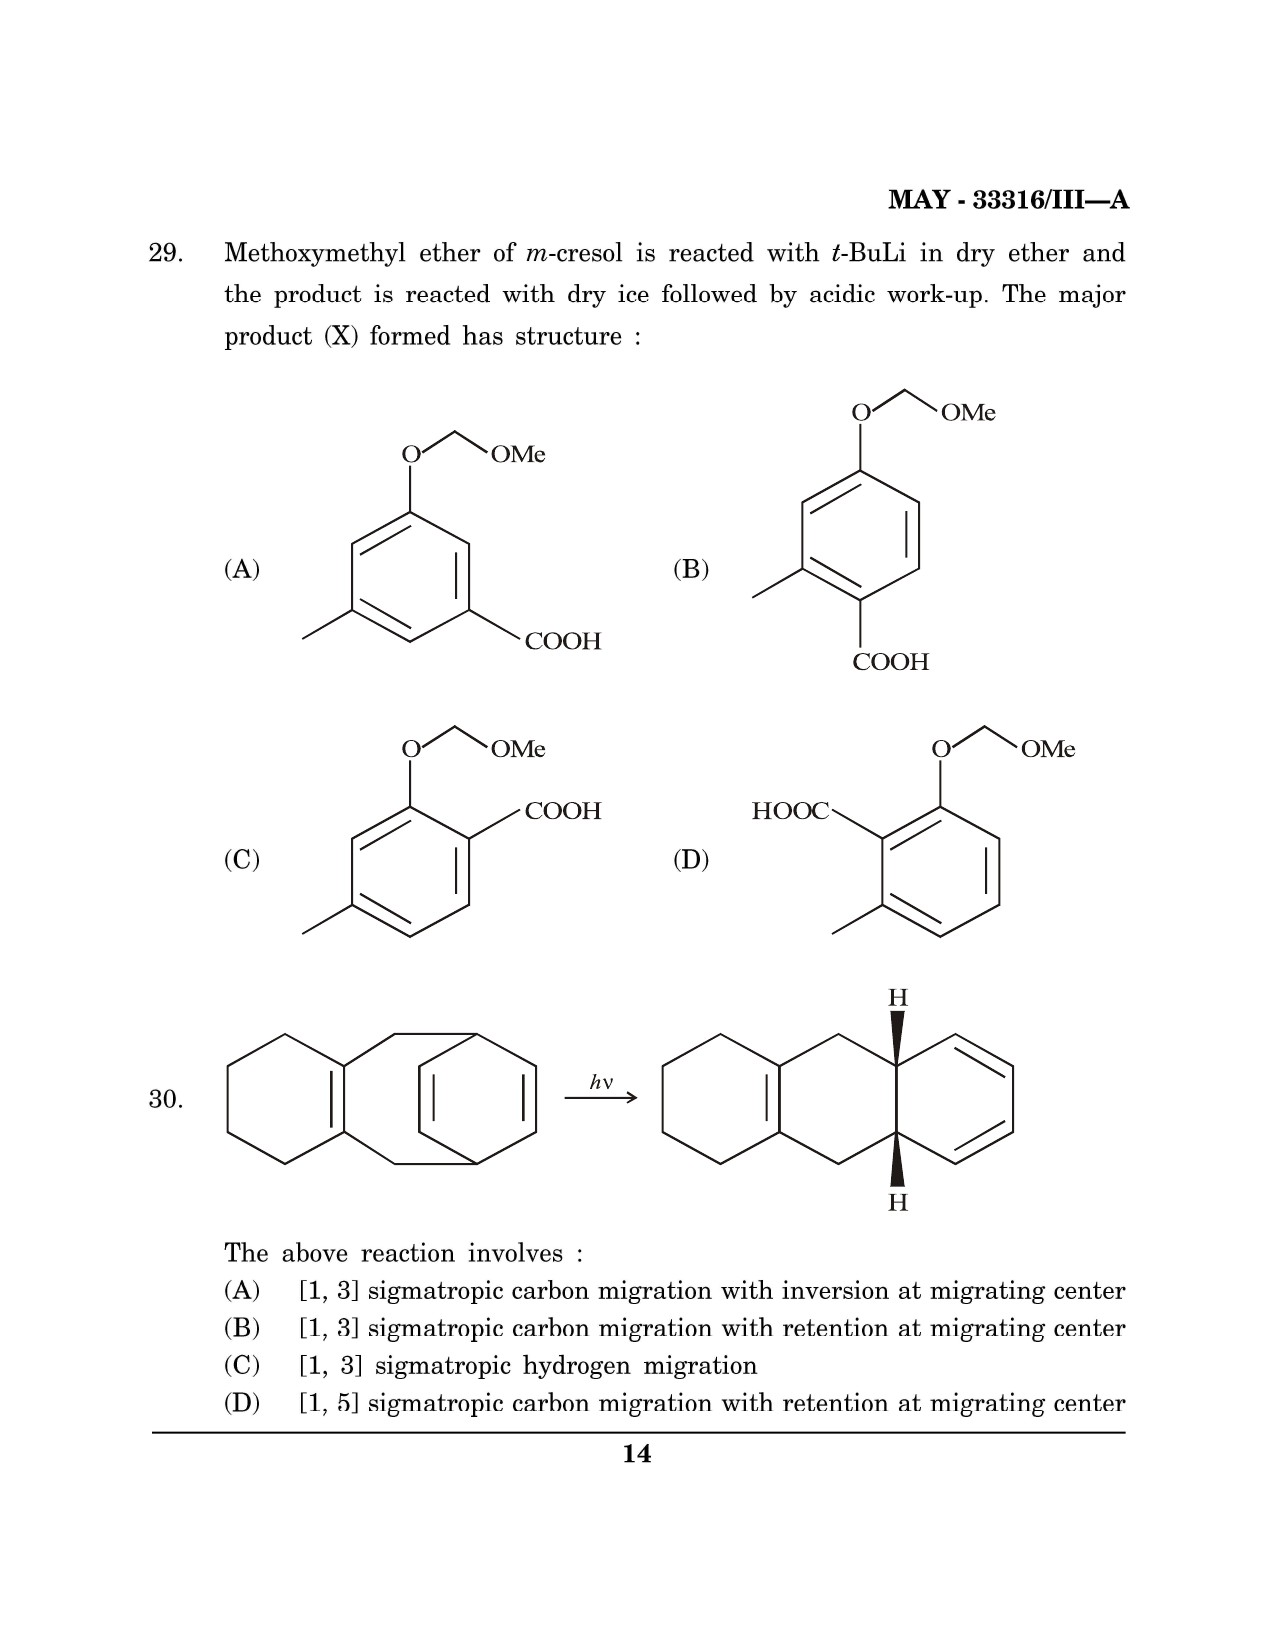 Maharashtra SET Chemical Sciences Question Paper III May 2016 13